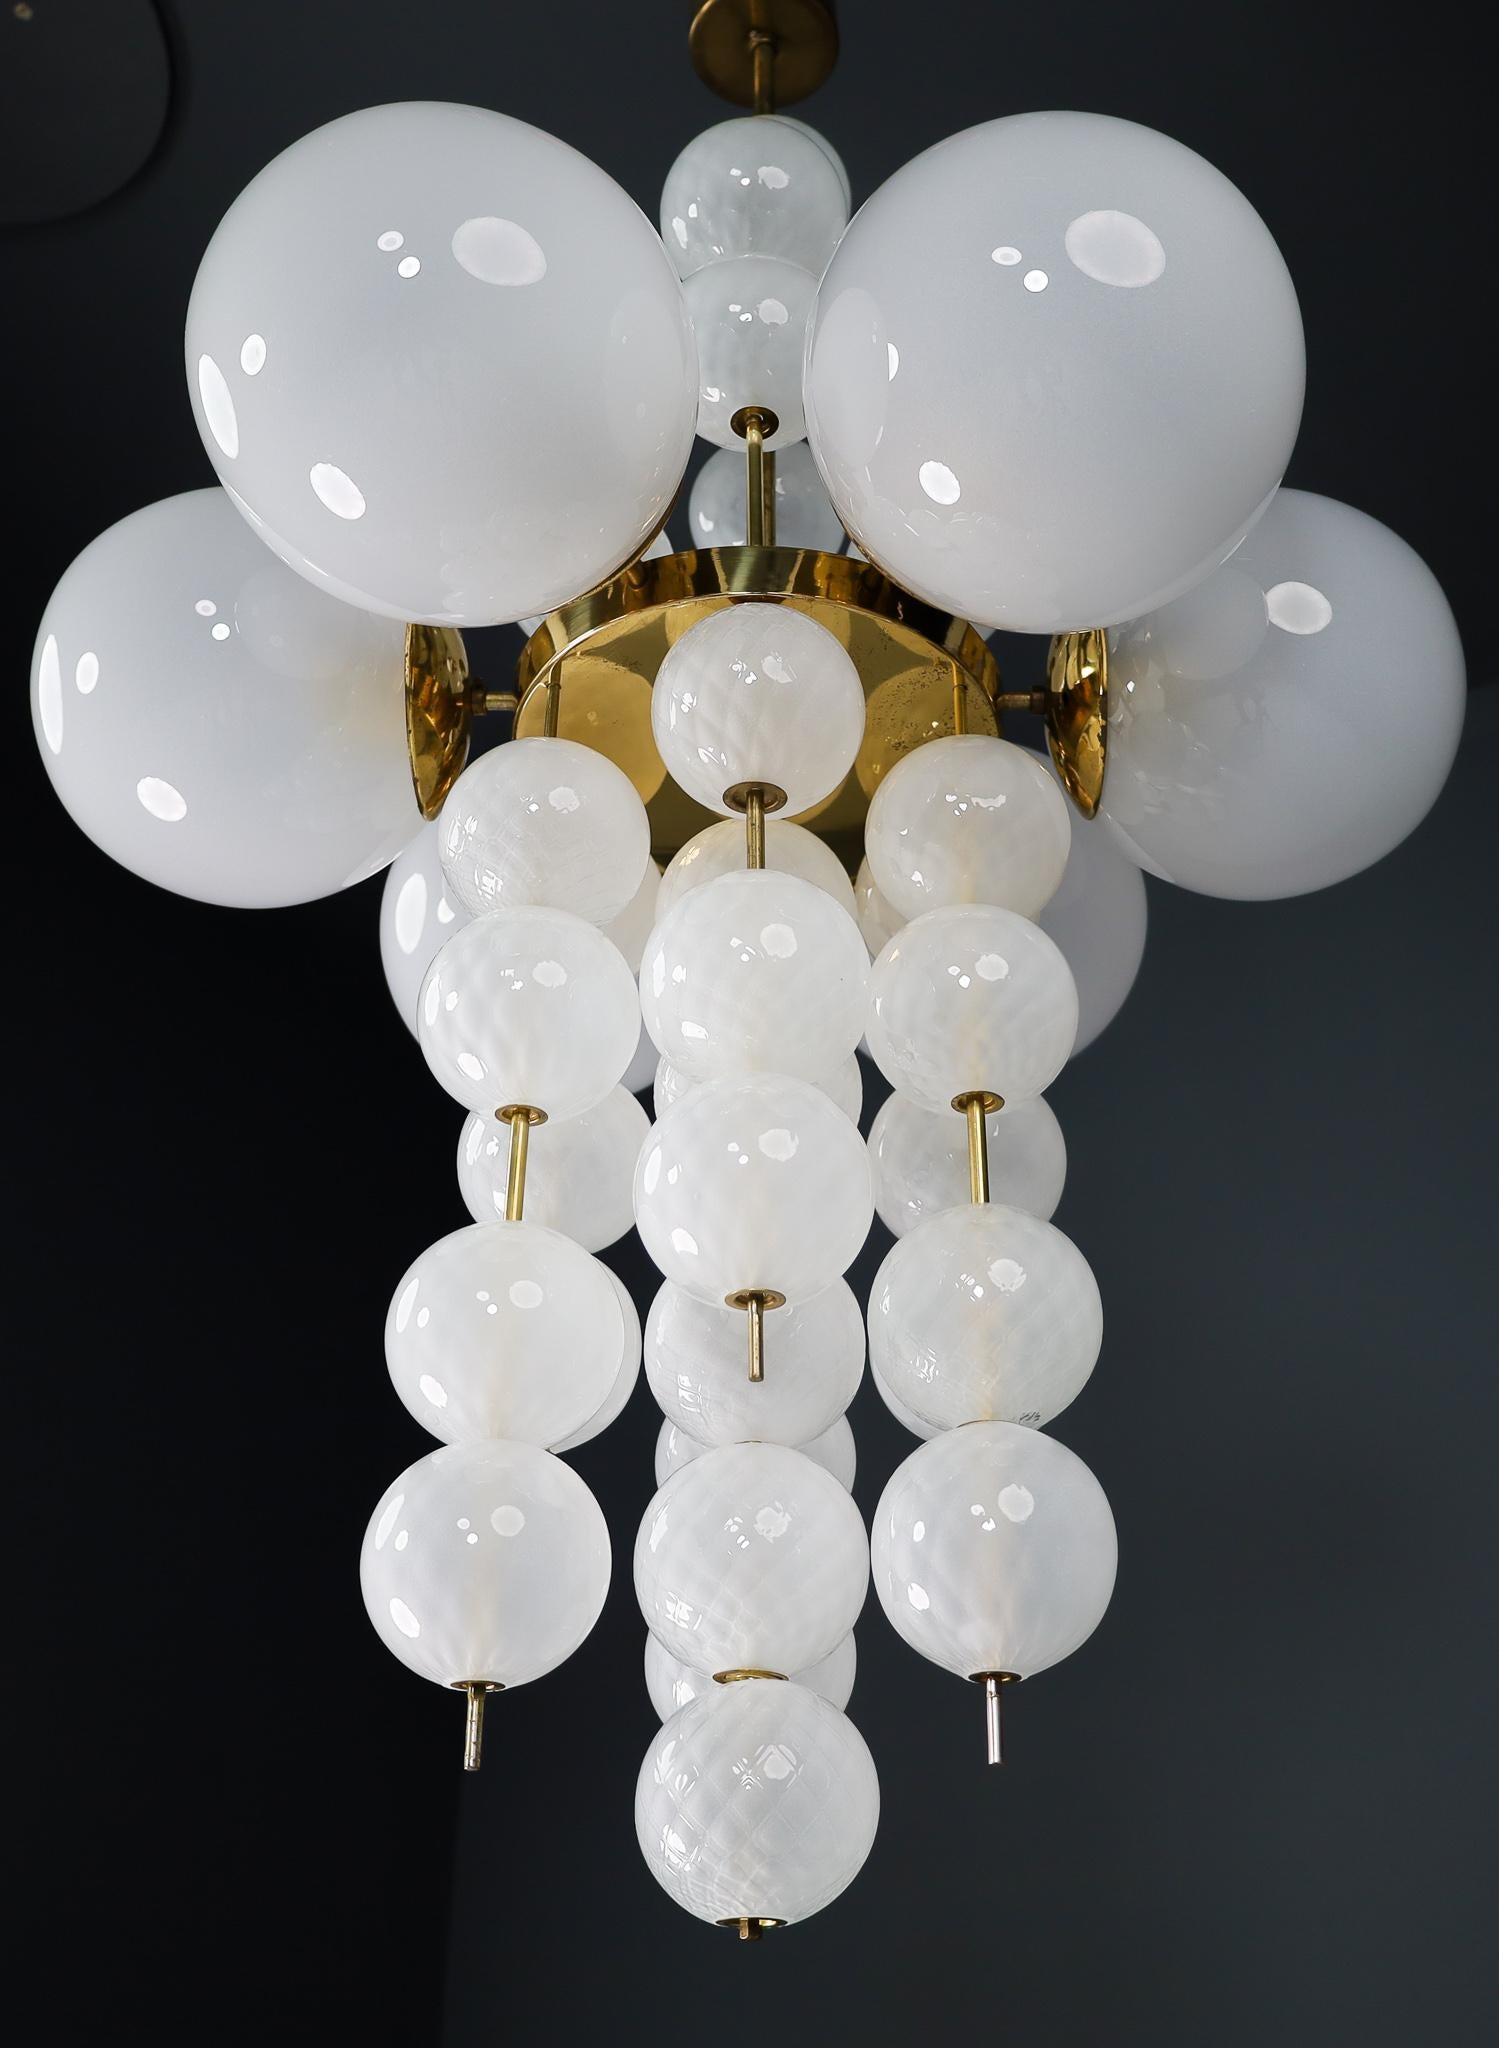 Czech Set of 3 XL Hotel Chandeliers with Brass Fixture and Hand-Blowed Glass Globes